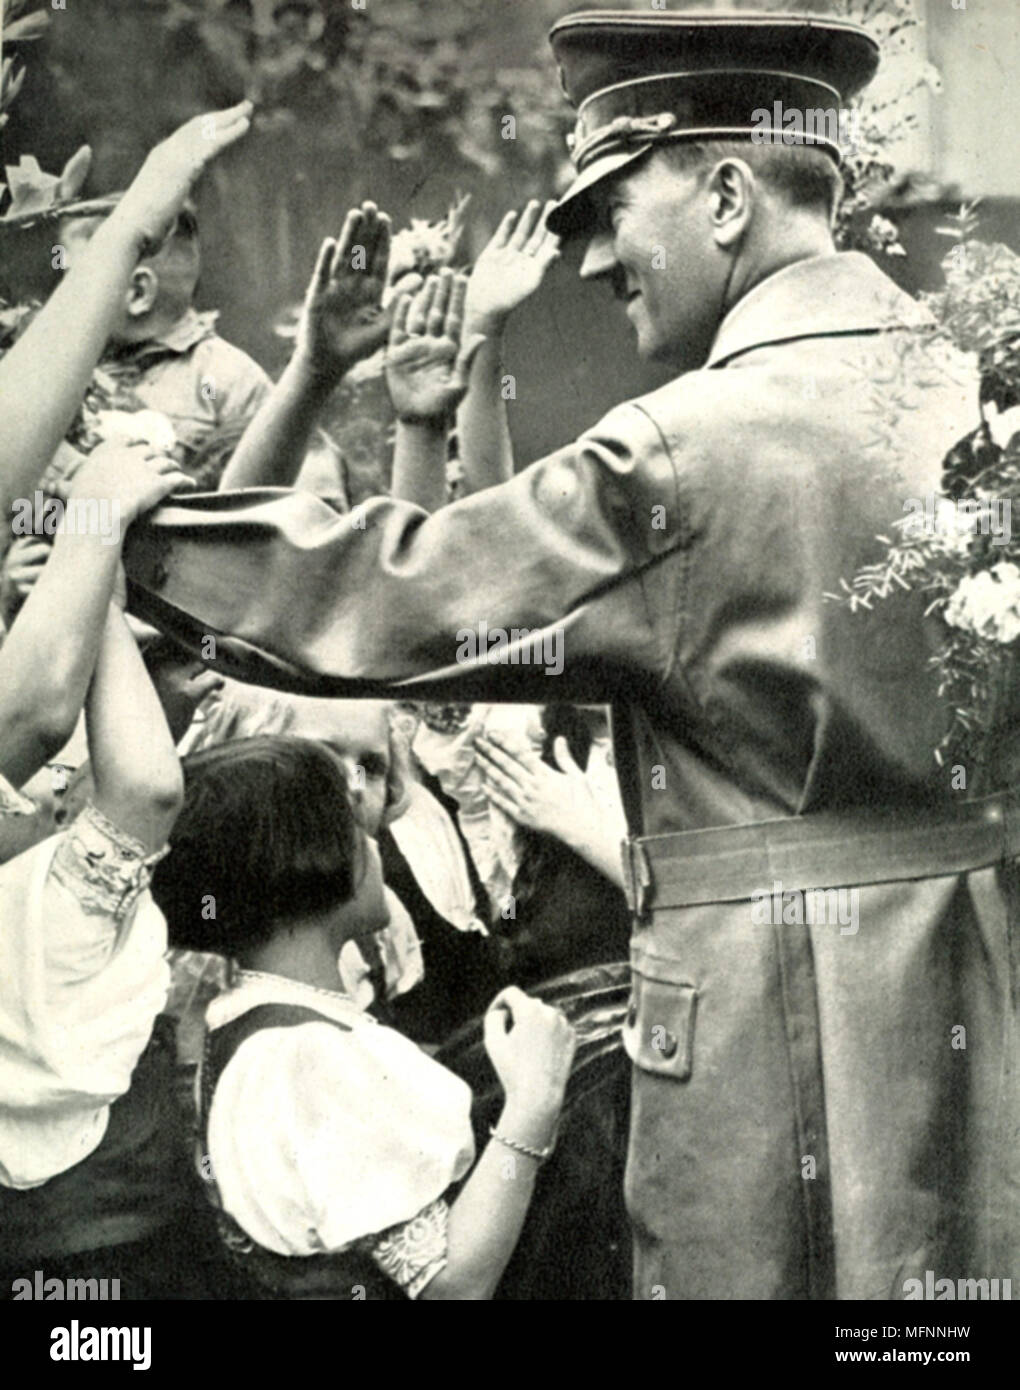 Adolf Hitler greets crowd during a visit to a German town, c1938. Stock Photo